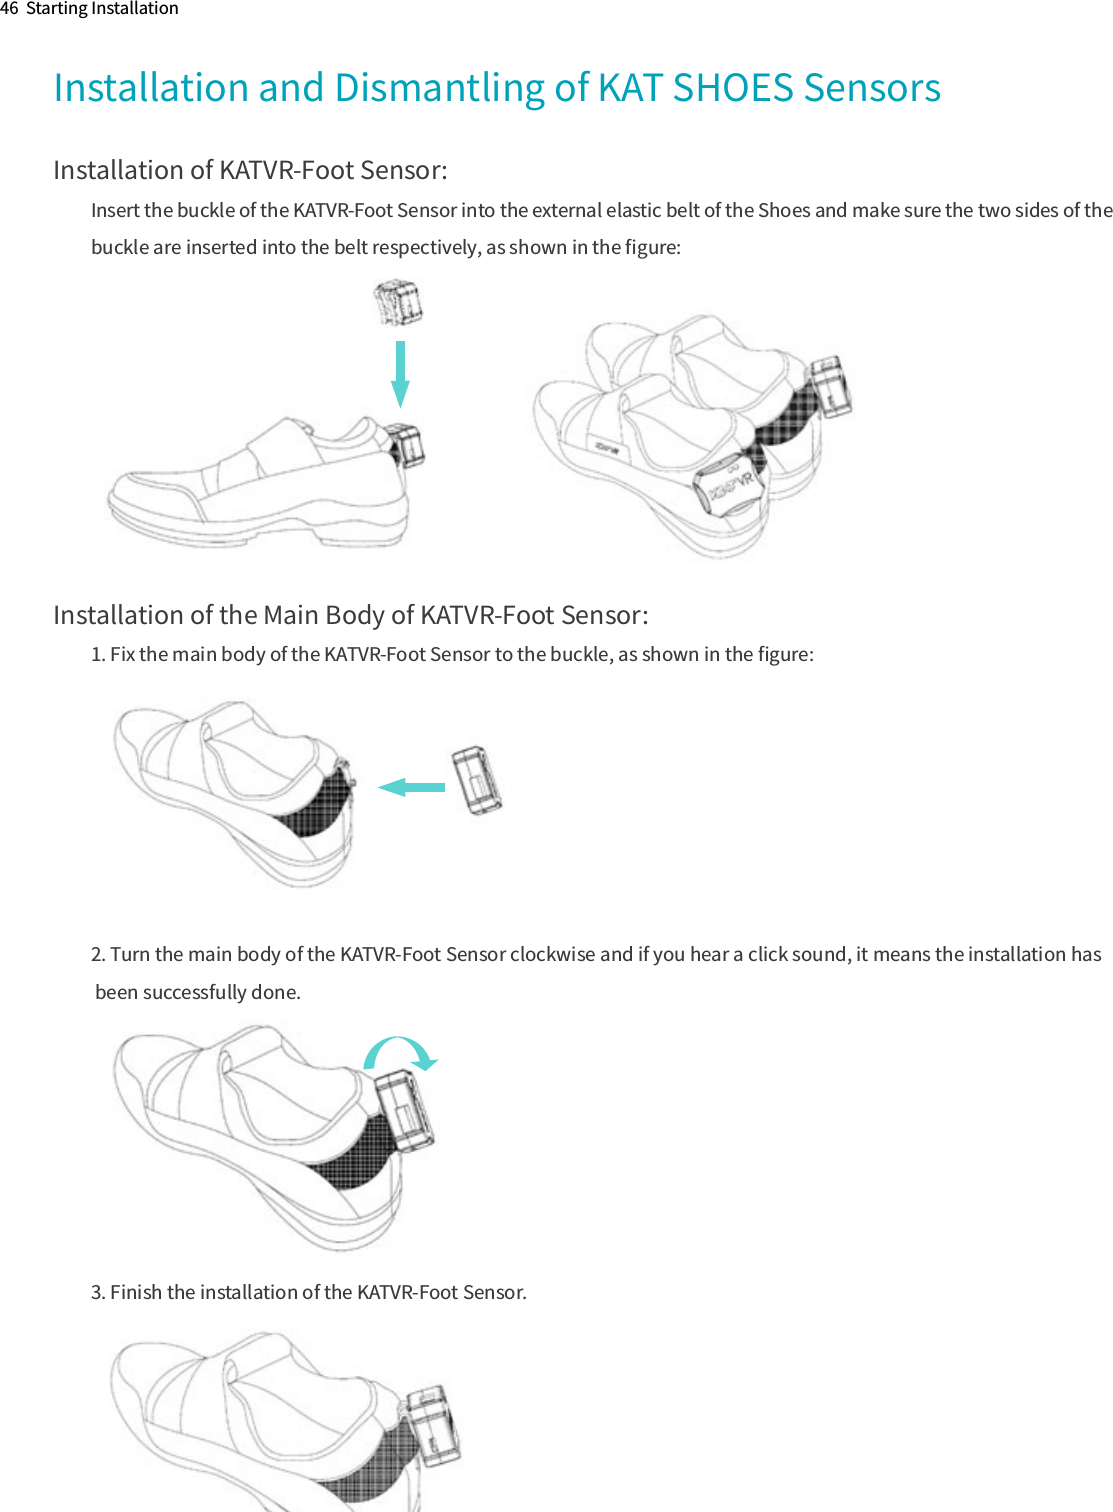 Installation of KATVR-Foot Sensor:Insert the buckle of the KATVR-Foot Sensor into the external elastic belt of the Shoes and make sure the two sides of the buckle are inserted into the belt respectively, as shown in the ﬁgure:Installation of the Main Body of KATVR-Foot Sensor:1. Fix the main body of the KATVR-Foot Sensor to the buckle, as shown in the ﬁgure:2. Turn the main body of the KATVR-Foot Sensor clockwise and if you hear a click sound, it means the installation has been successfully done.3. Finish the installation of the KATVR-Foot Sensor.46  Starting InstallationInstallation and Dismantling of KAT SHOES Sensors